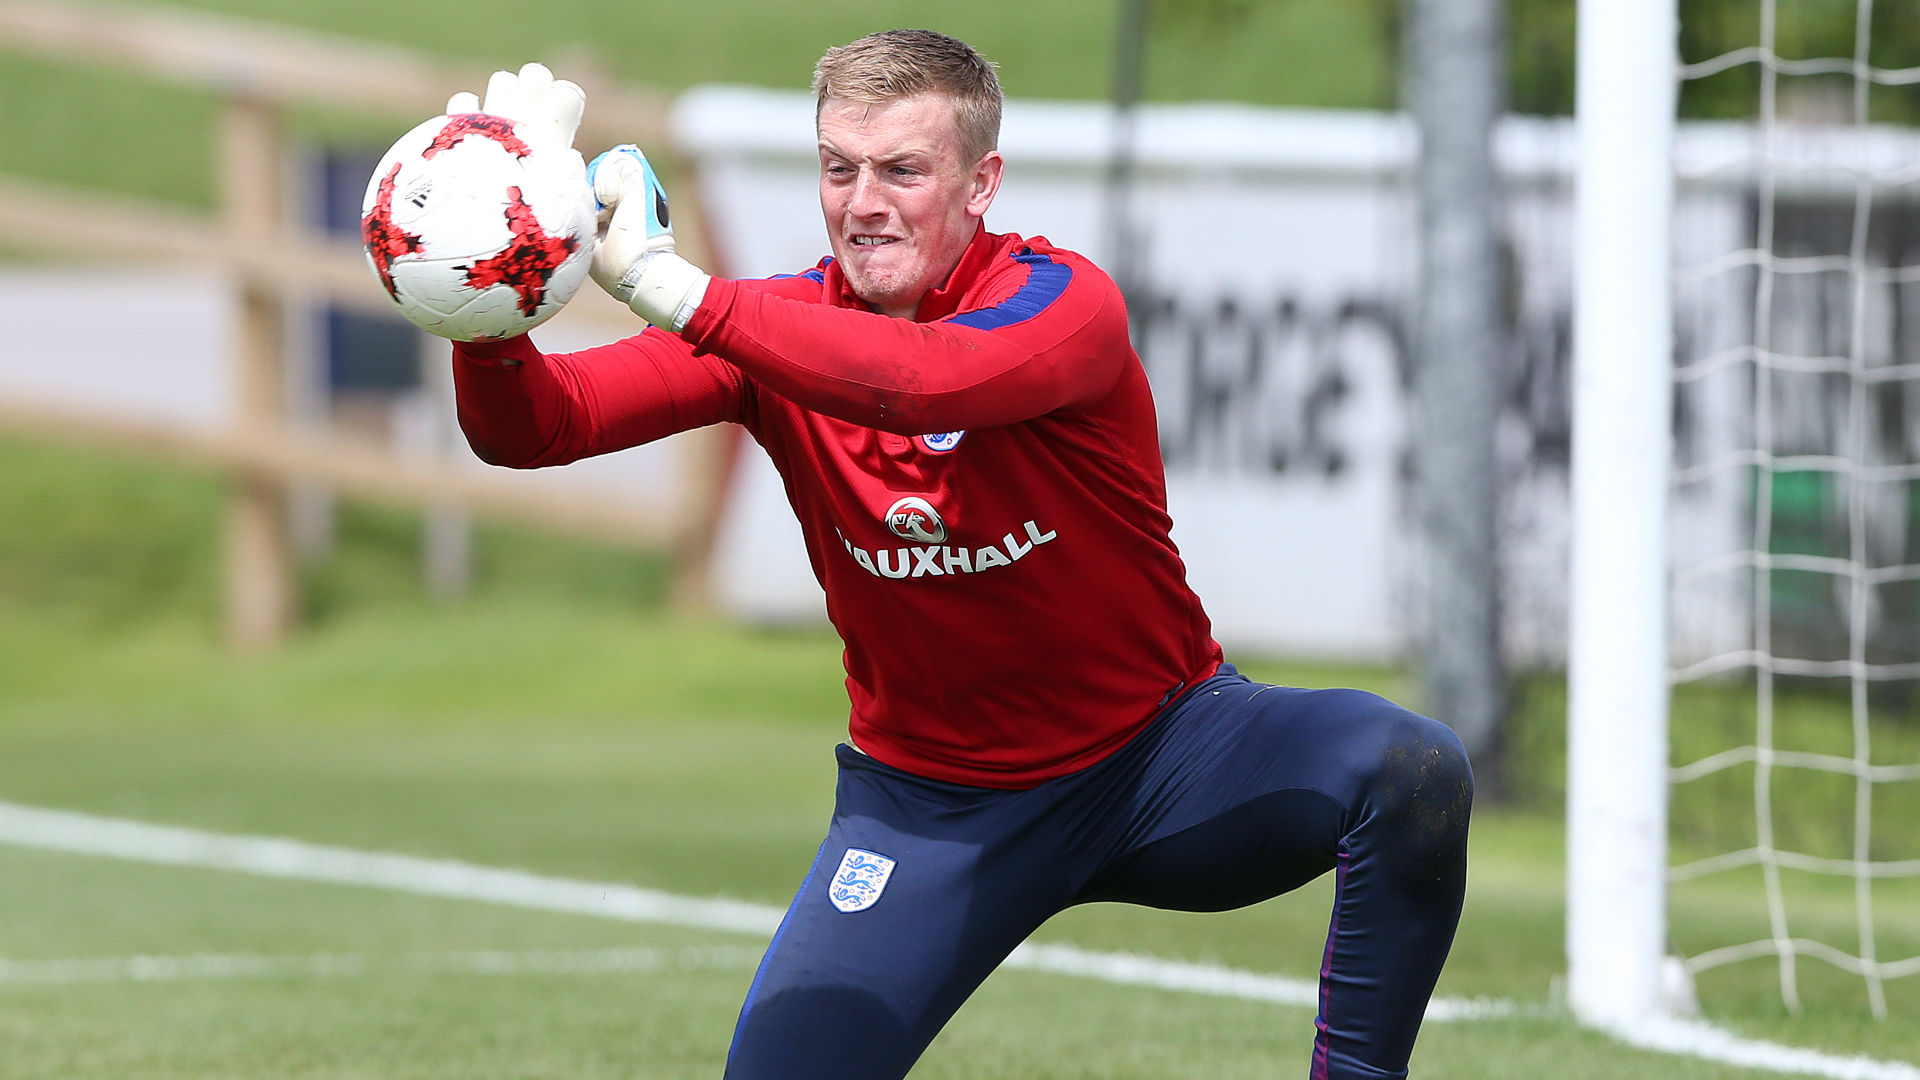 samtale Mirakuløs tapperhed It's just a number - Pickford relaxed over £30m price tag